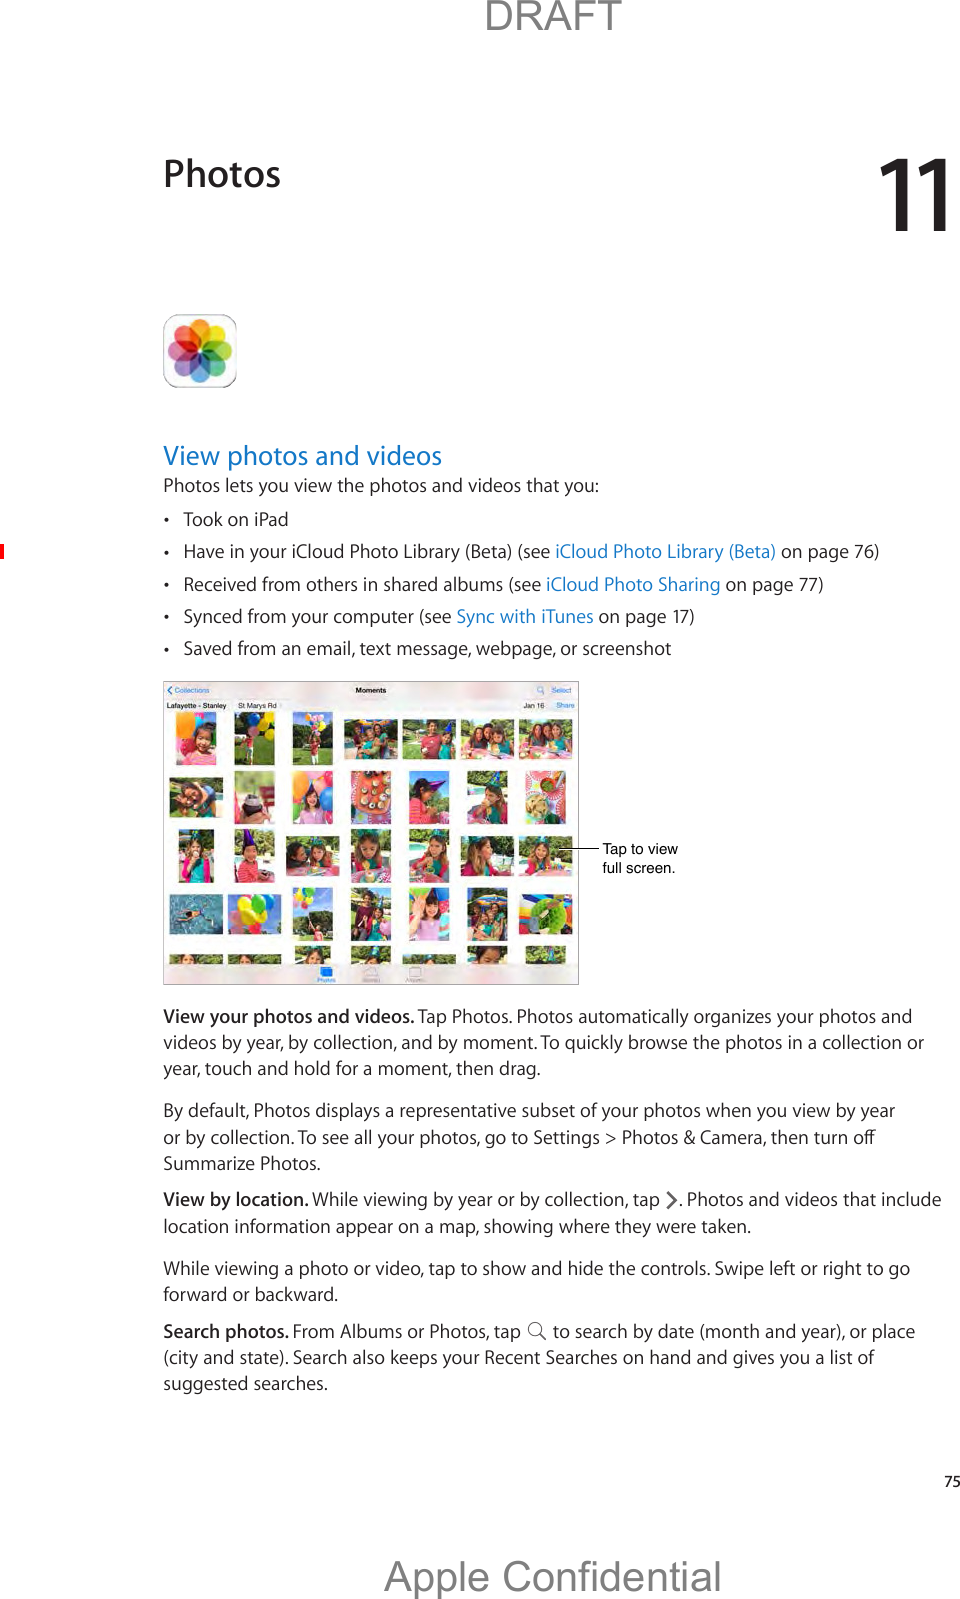 11   75View photos and videosPhotos lets you view the photos and videos that you: Took on iPad Have in your iCloud Photo Library (Beta) (see iCloud Photo Library (Beta) on page 76) Received from others in shared albums (see iCloud Photo Sharing on page 77) Synced from your computer (see Sync with iTunes on page 17) Saved from an email, text message, webpage, or screenshotTap to viewfull screen.Tap to viewfull screen.View your photos and videos. Tap Photos. Photos automatically organizes your photos and videos by year, by collection, and by moment. To quickly browse the photos in a collection or year, touch and hold for a moment, then drag.By default, Photos displays a representative subset of your photos when you view by year Summarize Photos.View by location. While viewing by year or by collection, tap  . Photos and videos that include location information appear on a map, showing where they were taken.While viewing a photo or video, tap to show and hide the controls. Swipe left or right to go forward or backward.Search photos. From Albums or Photos, tap   to search by date (month and year), or place (city and state). Search also keeps your Recent Searches on hand and gives you a list of suggested searches.Photos          DRAFTApple Confidential